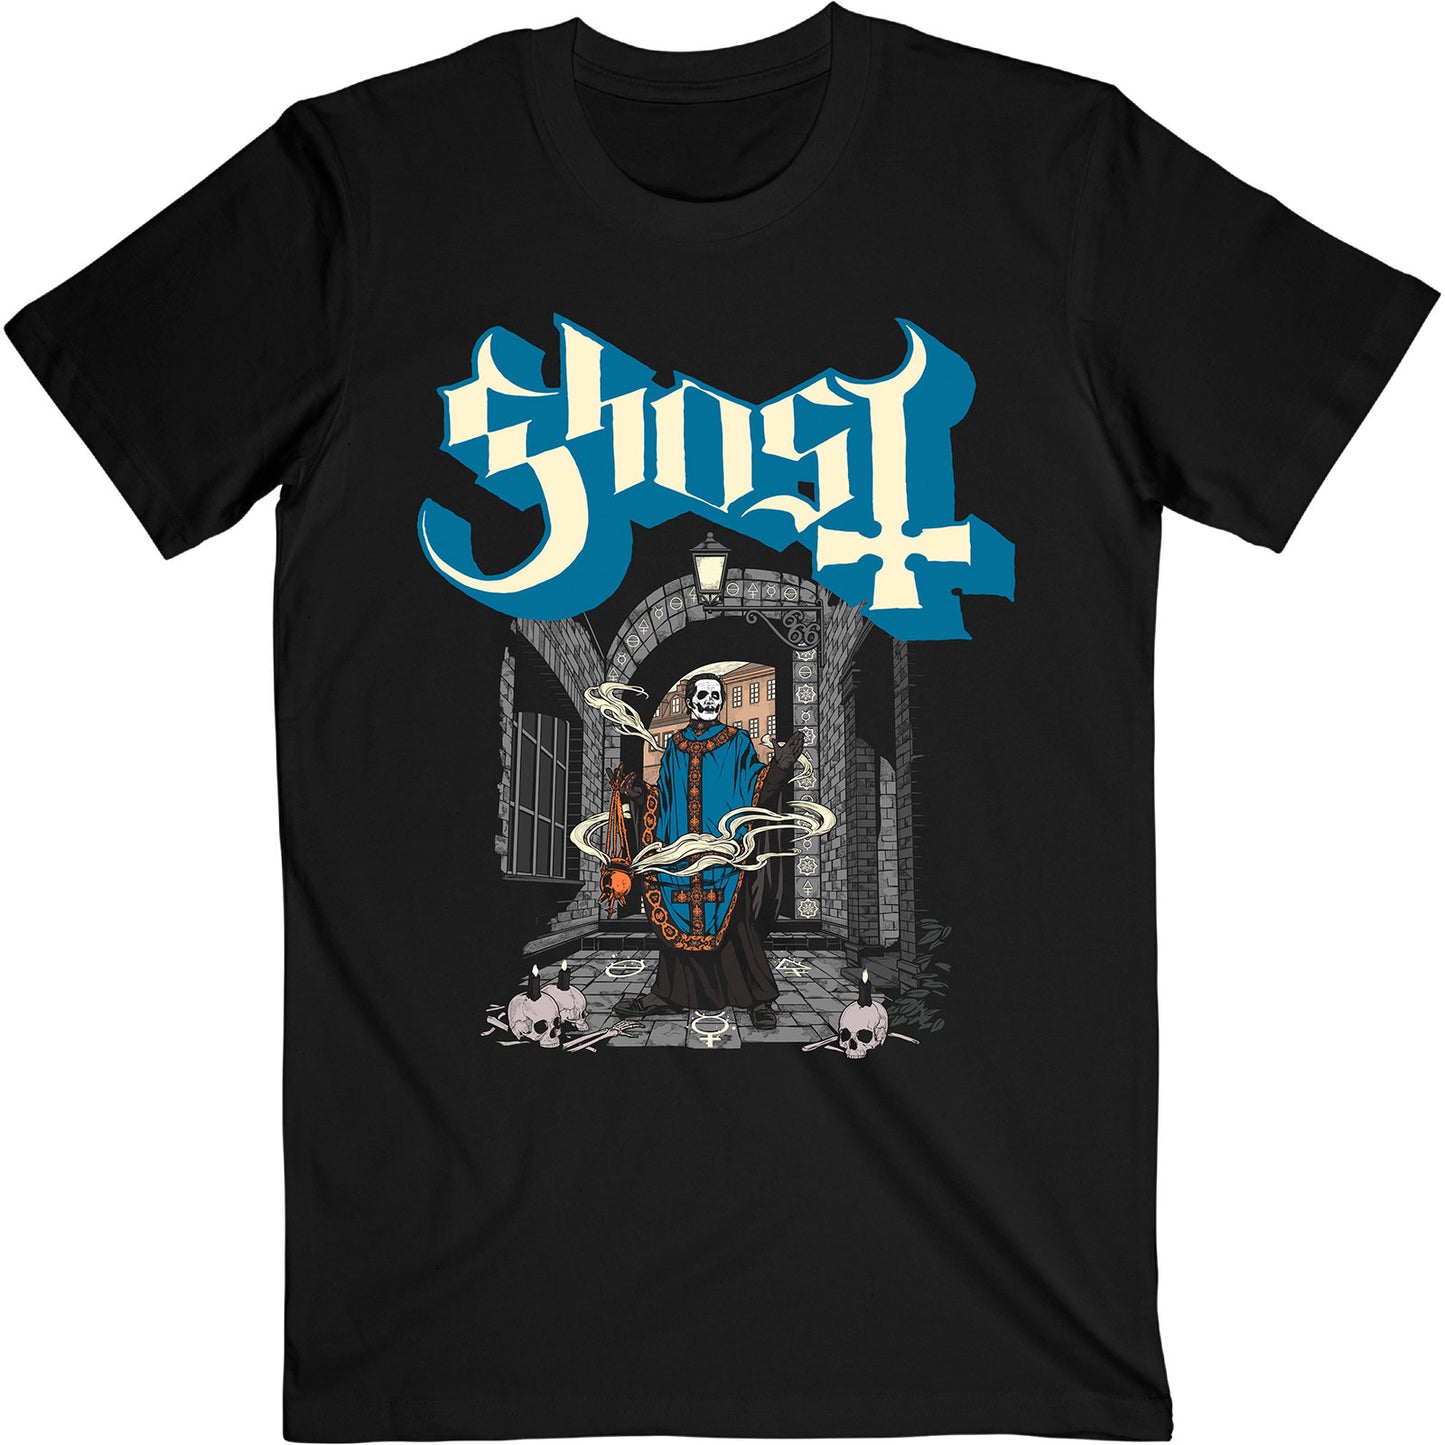 Ghost T-Shirt: Incense